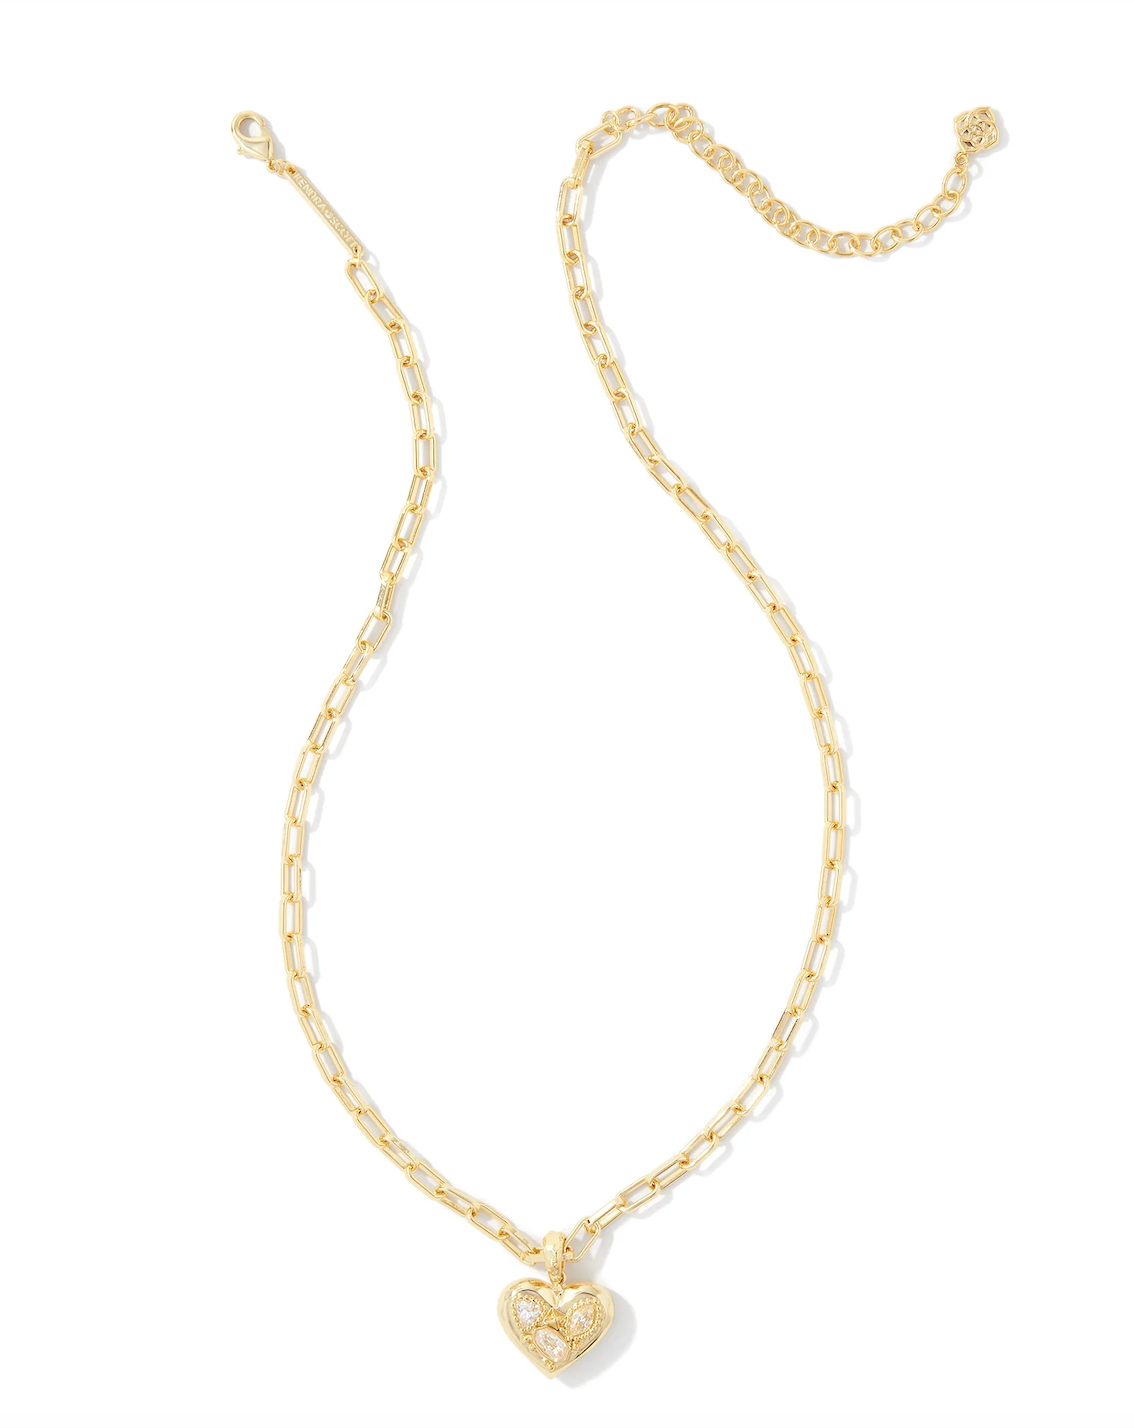 KENDRA SCOTT PENNY GOLD HEART SHORT PENDANT NECKLACE IN WHITE CRYSTAL